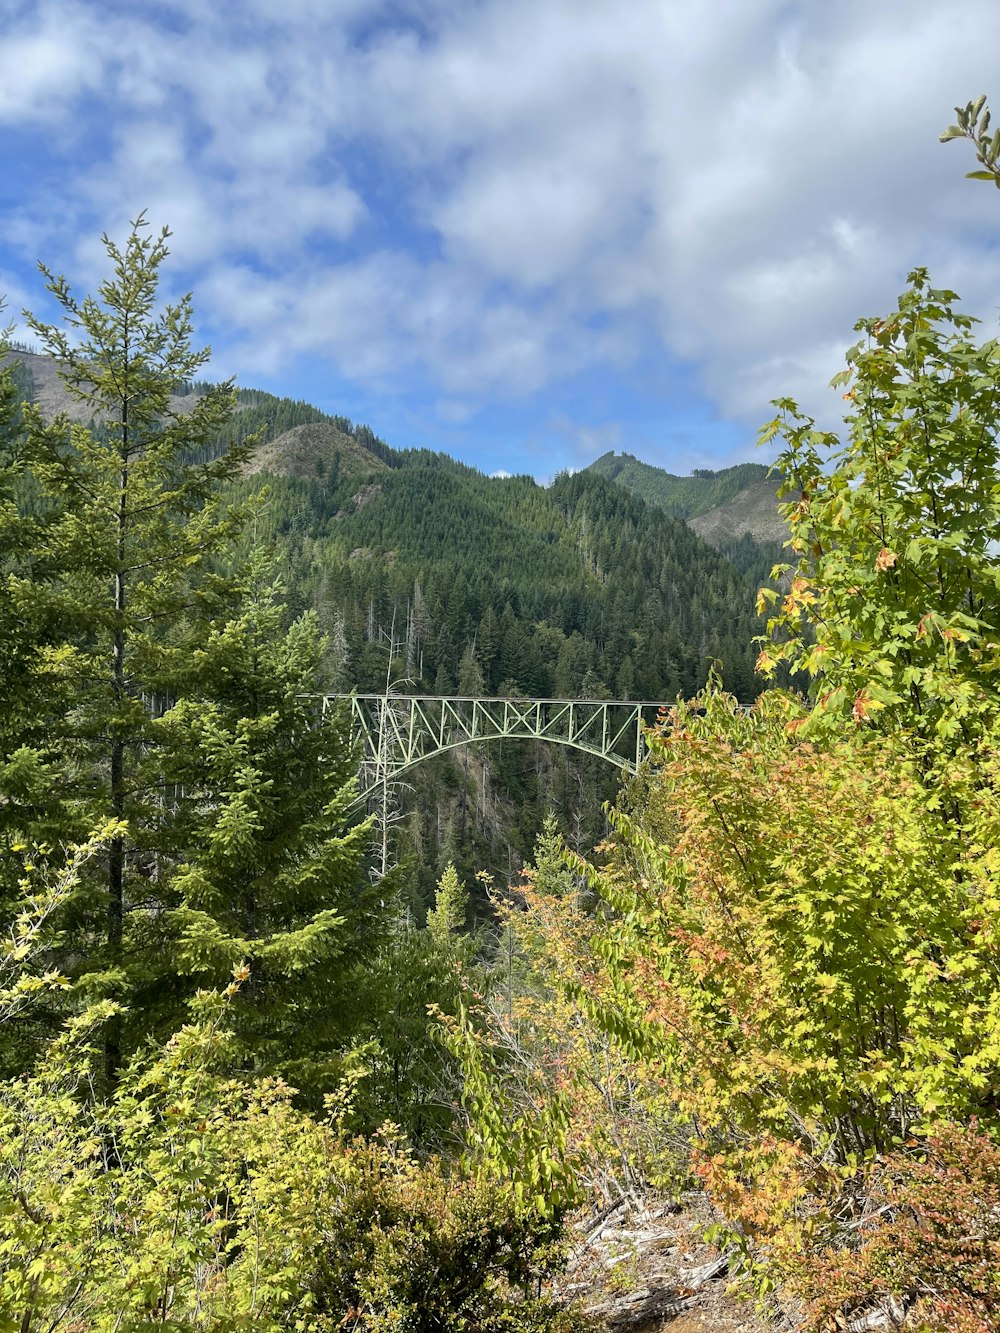 a bridge in the middle of a forest with mountains in the background